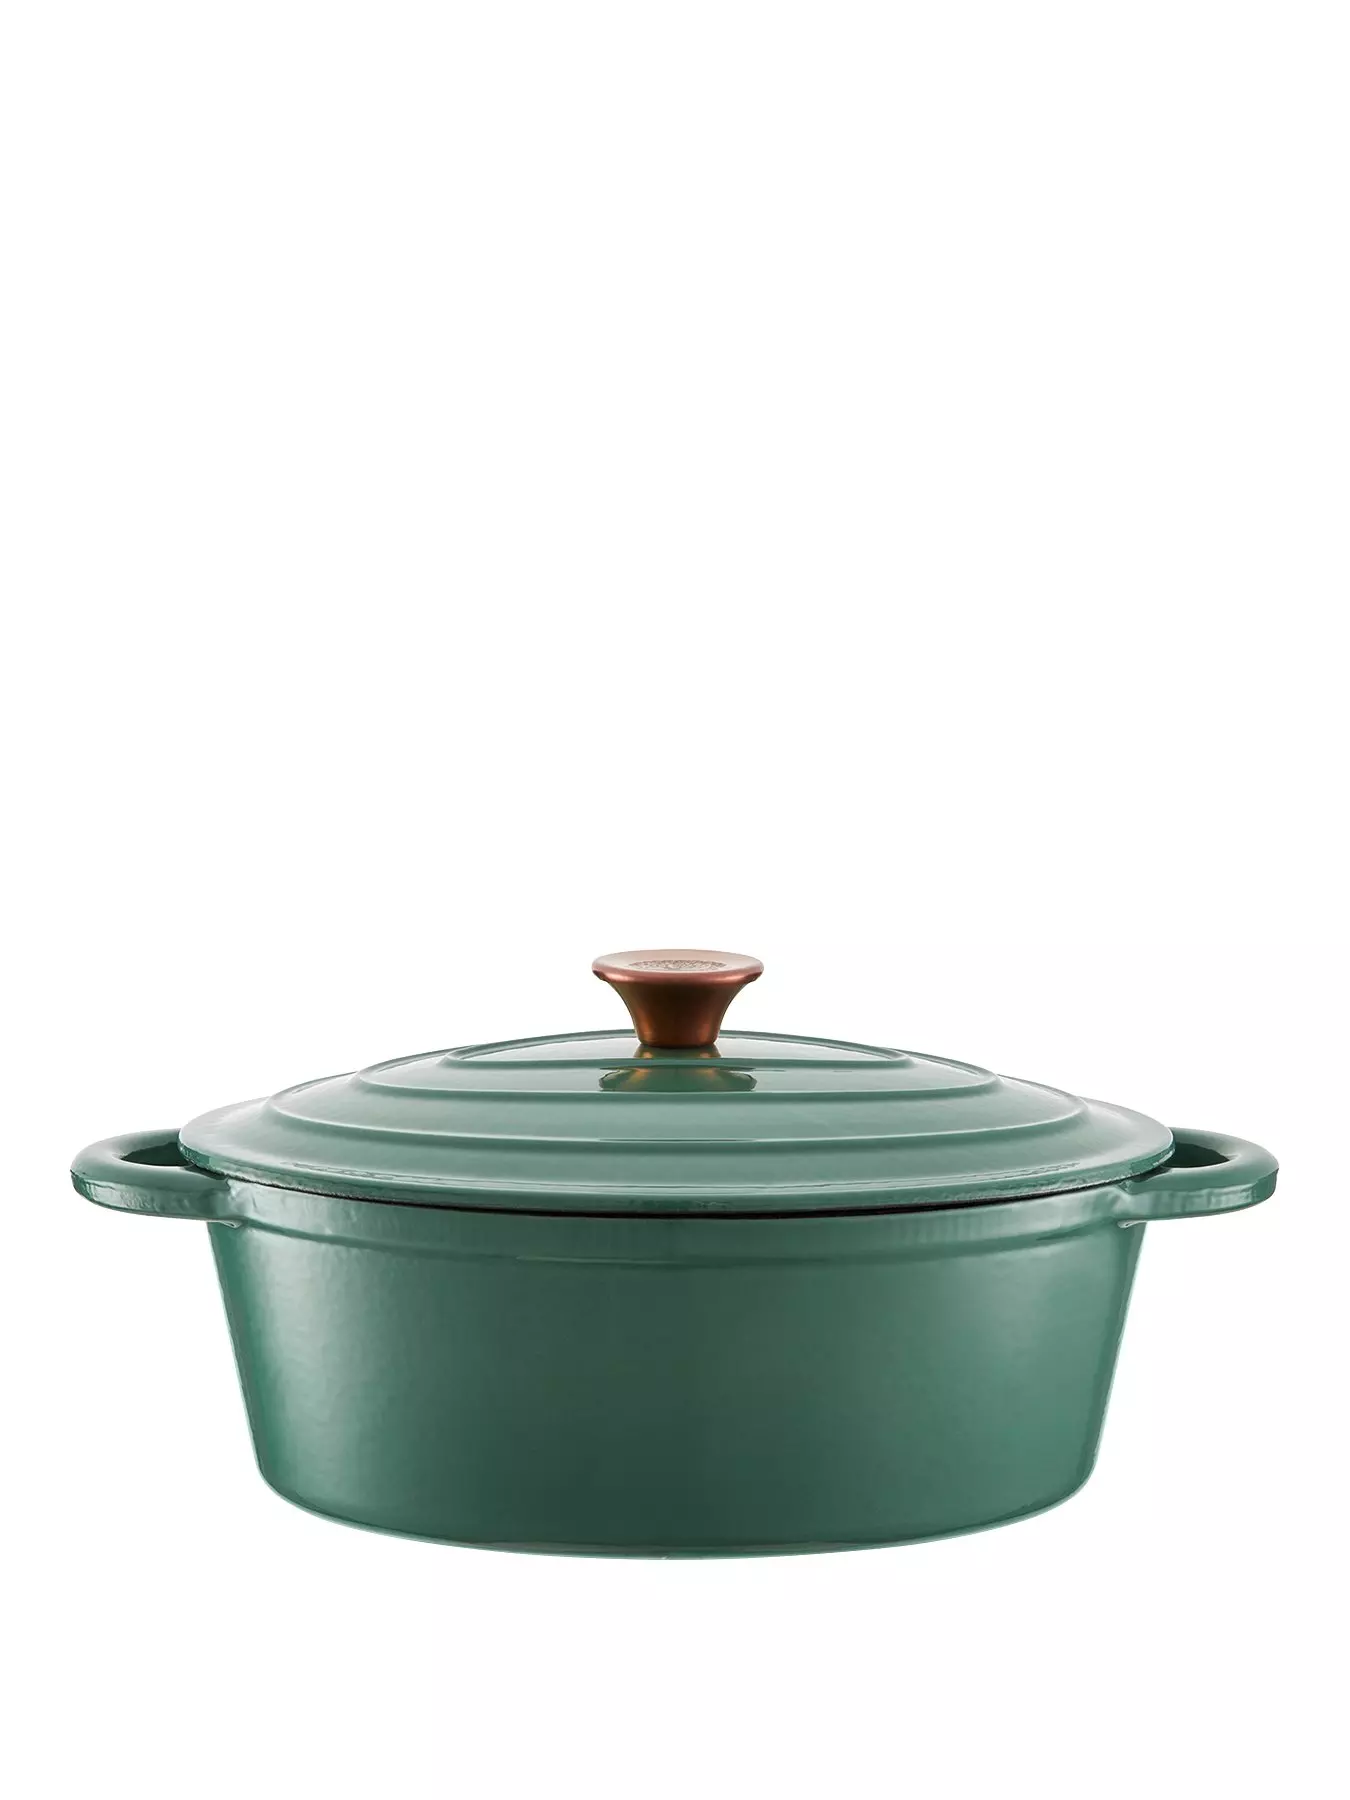 Delight Oval Dutch Oven, 4.5L 1 item